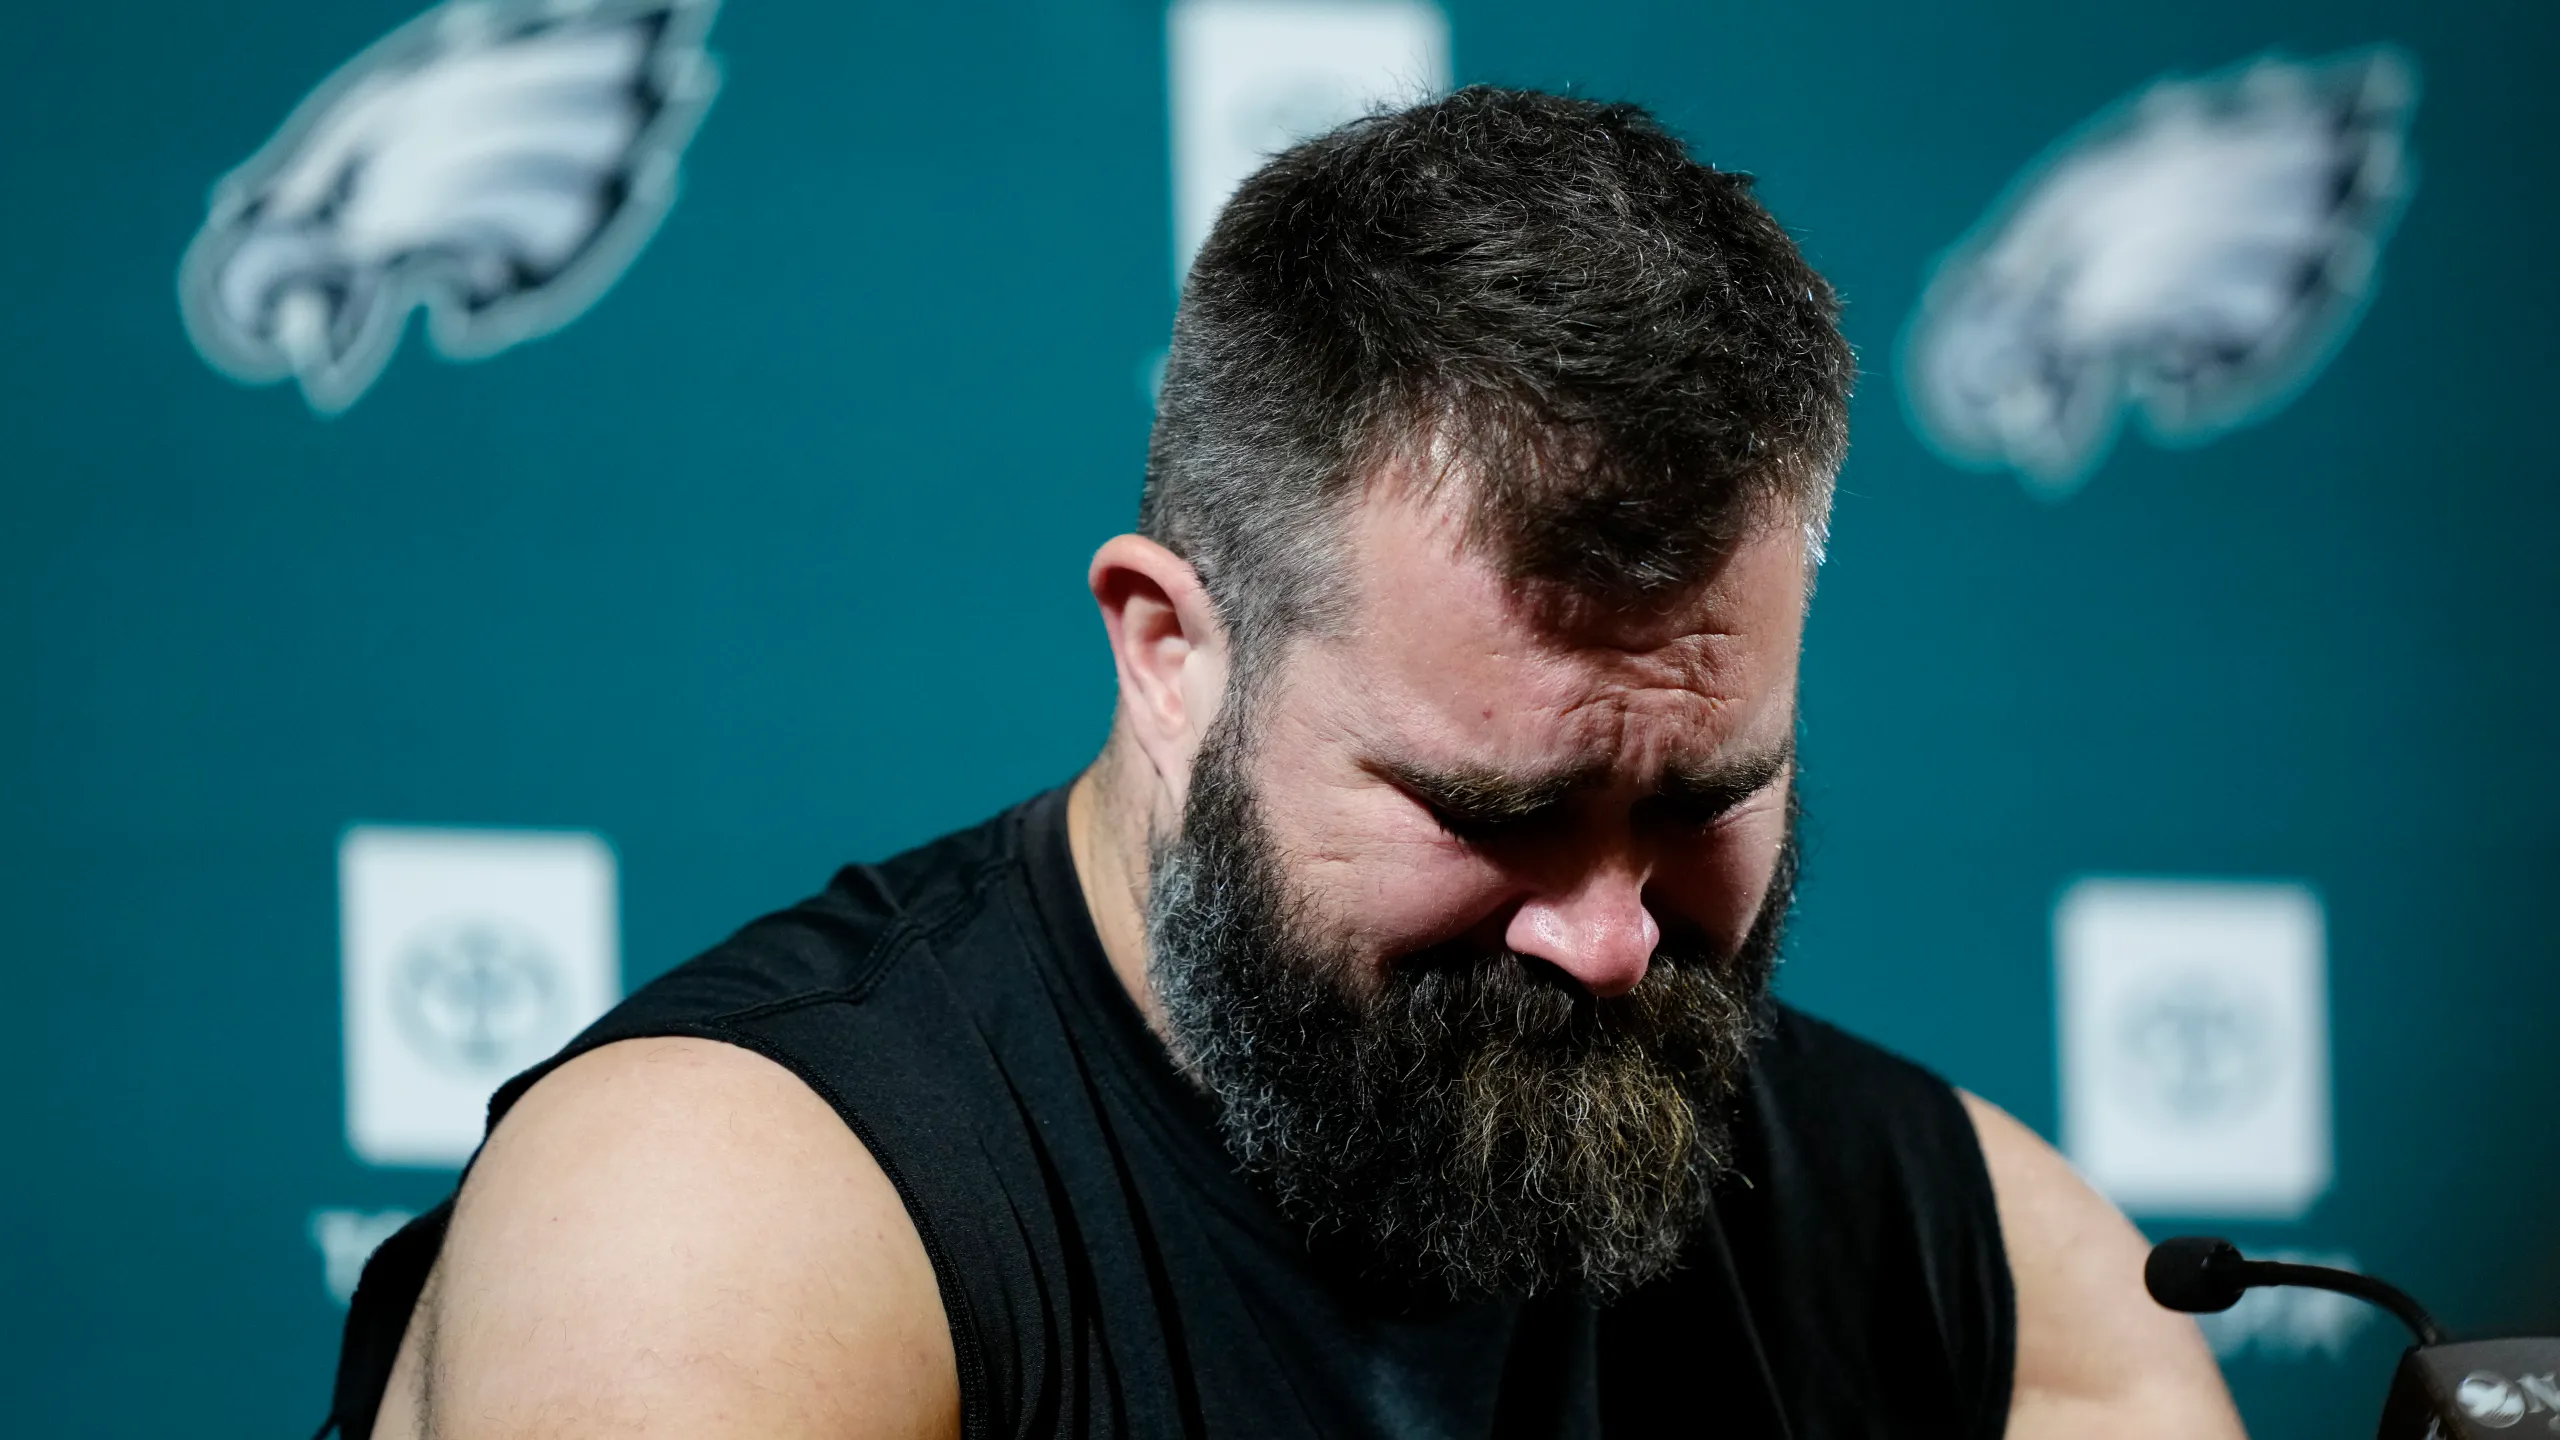 Jason Kelce retires an icon in one of sports' toughest cities